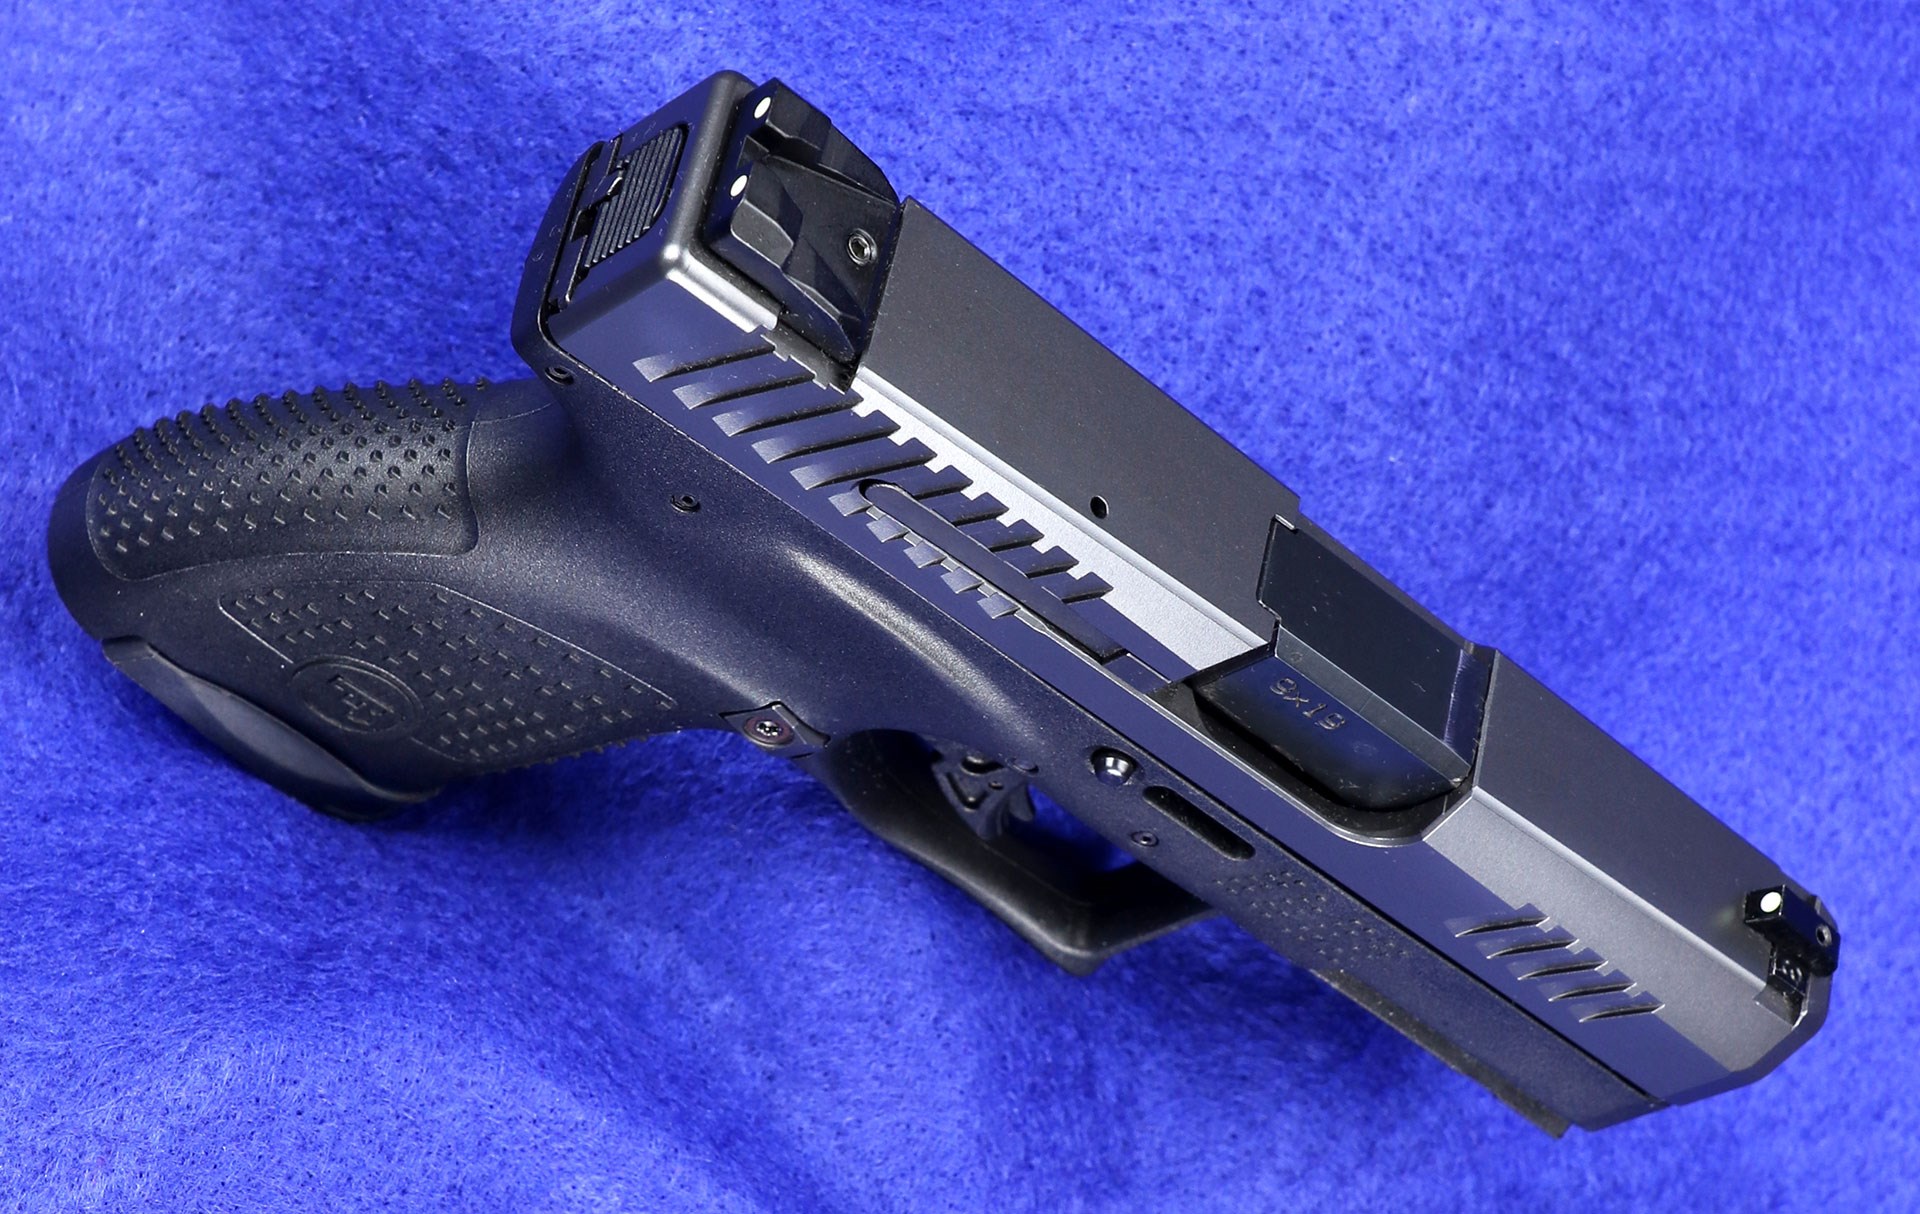 an overhead view of the CZ P-10 M on blue background, overhead view showing white three-dot iron sights.